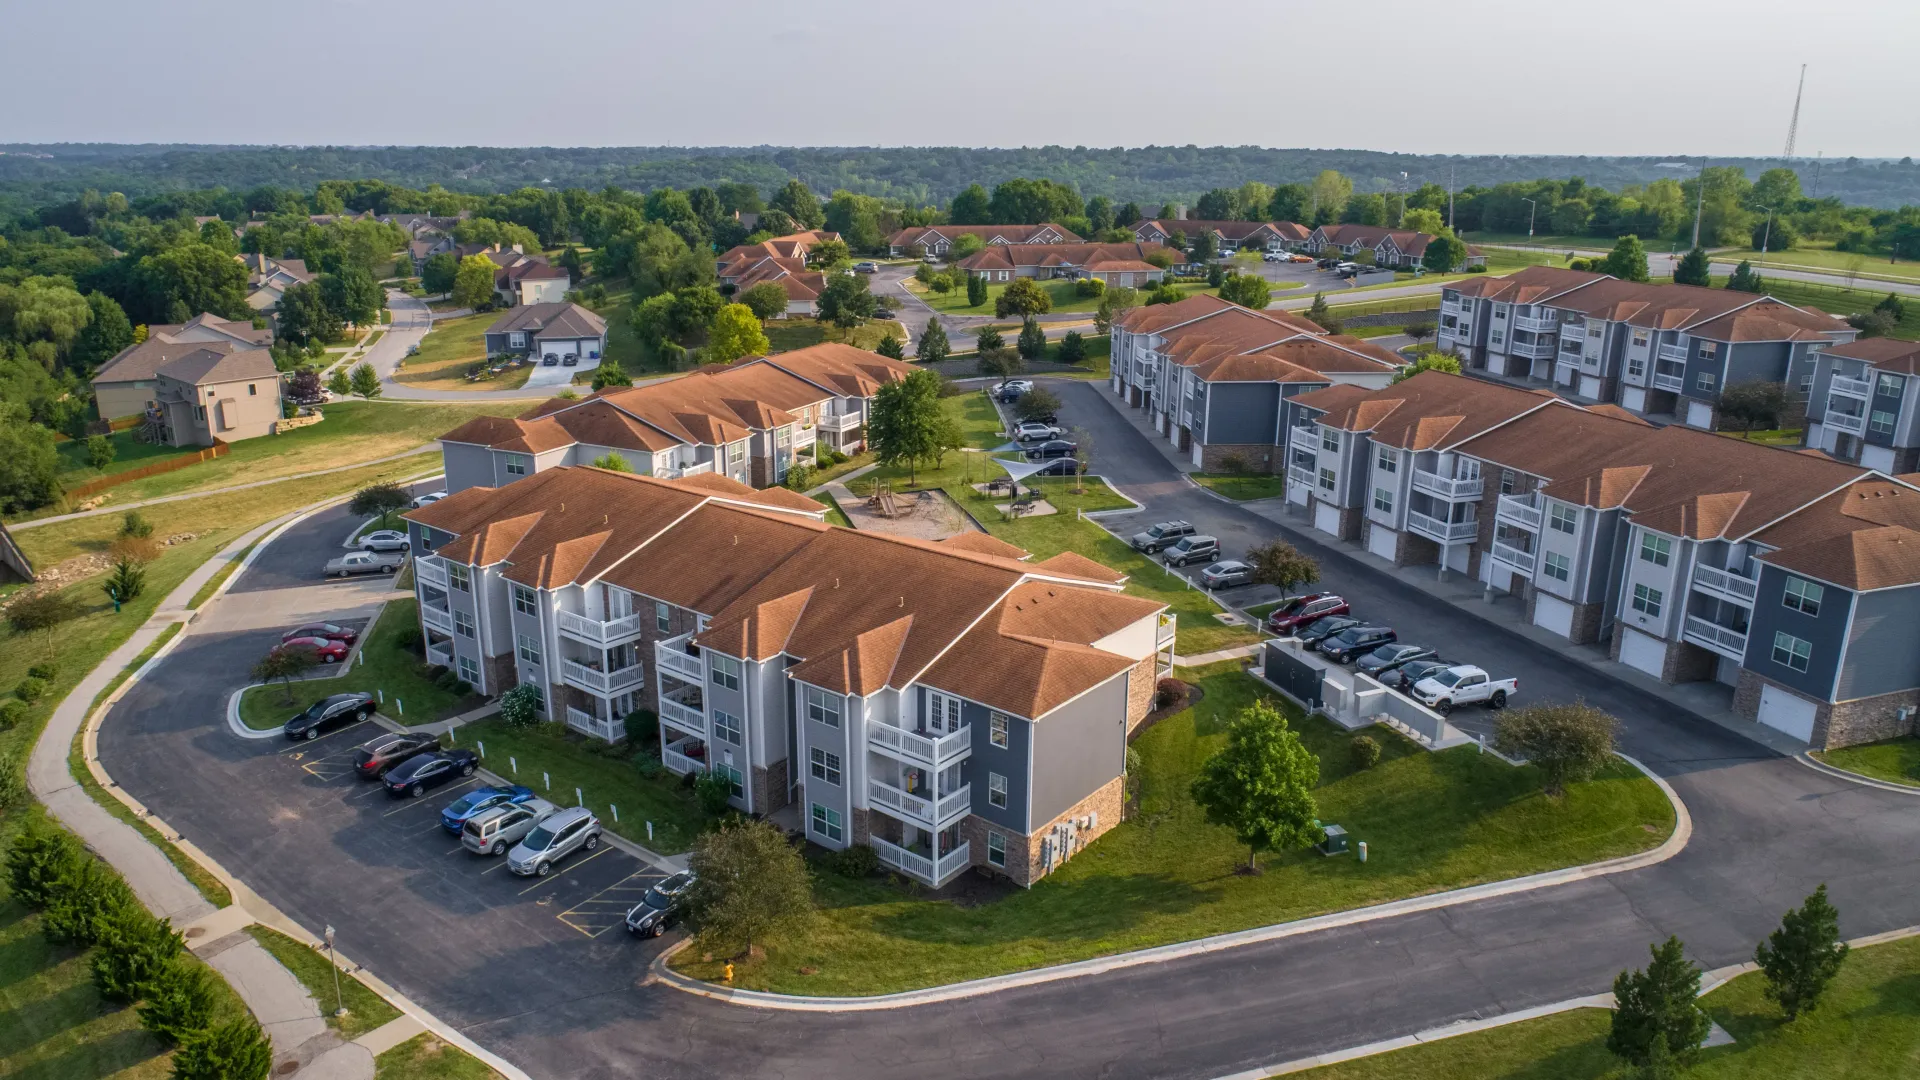 An aerial view offering a glimpse of the extensive community